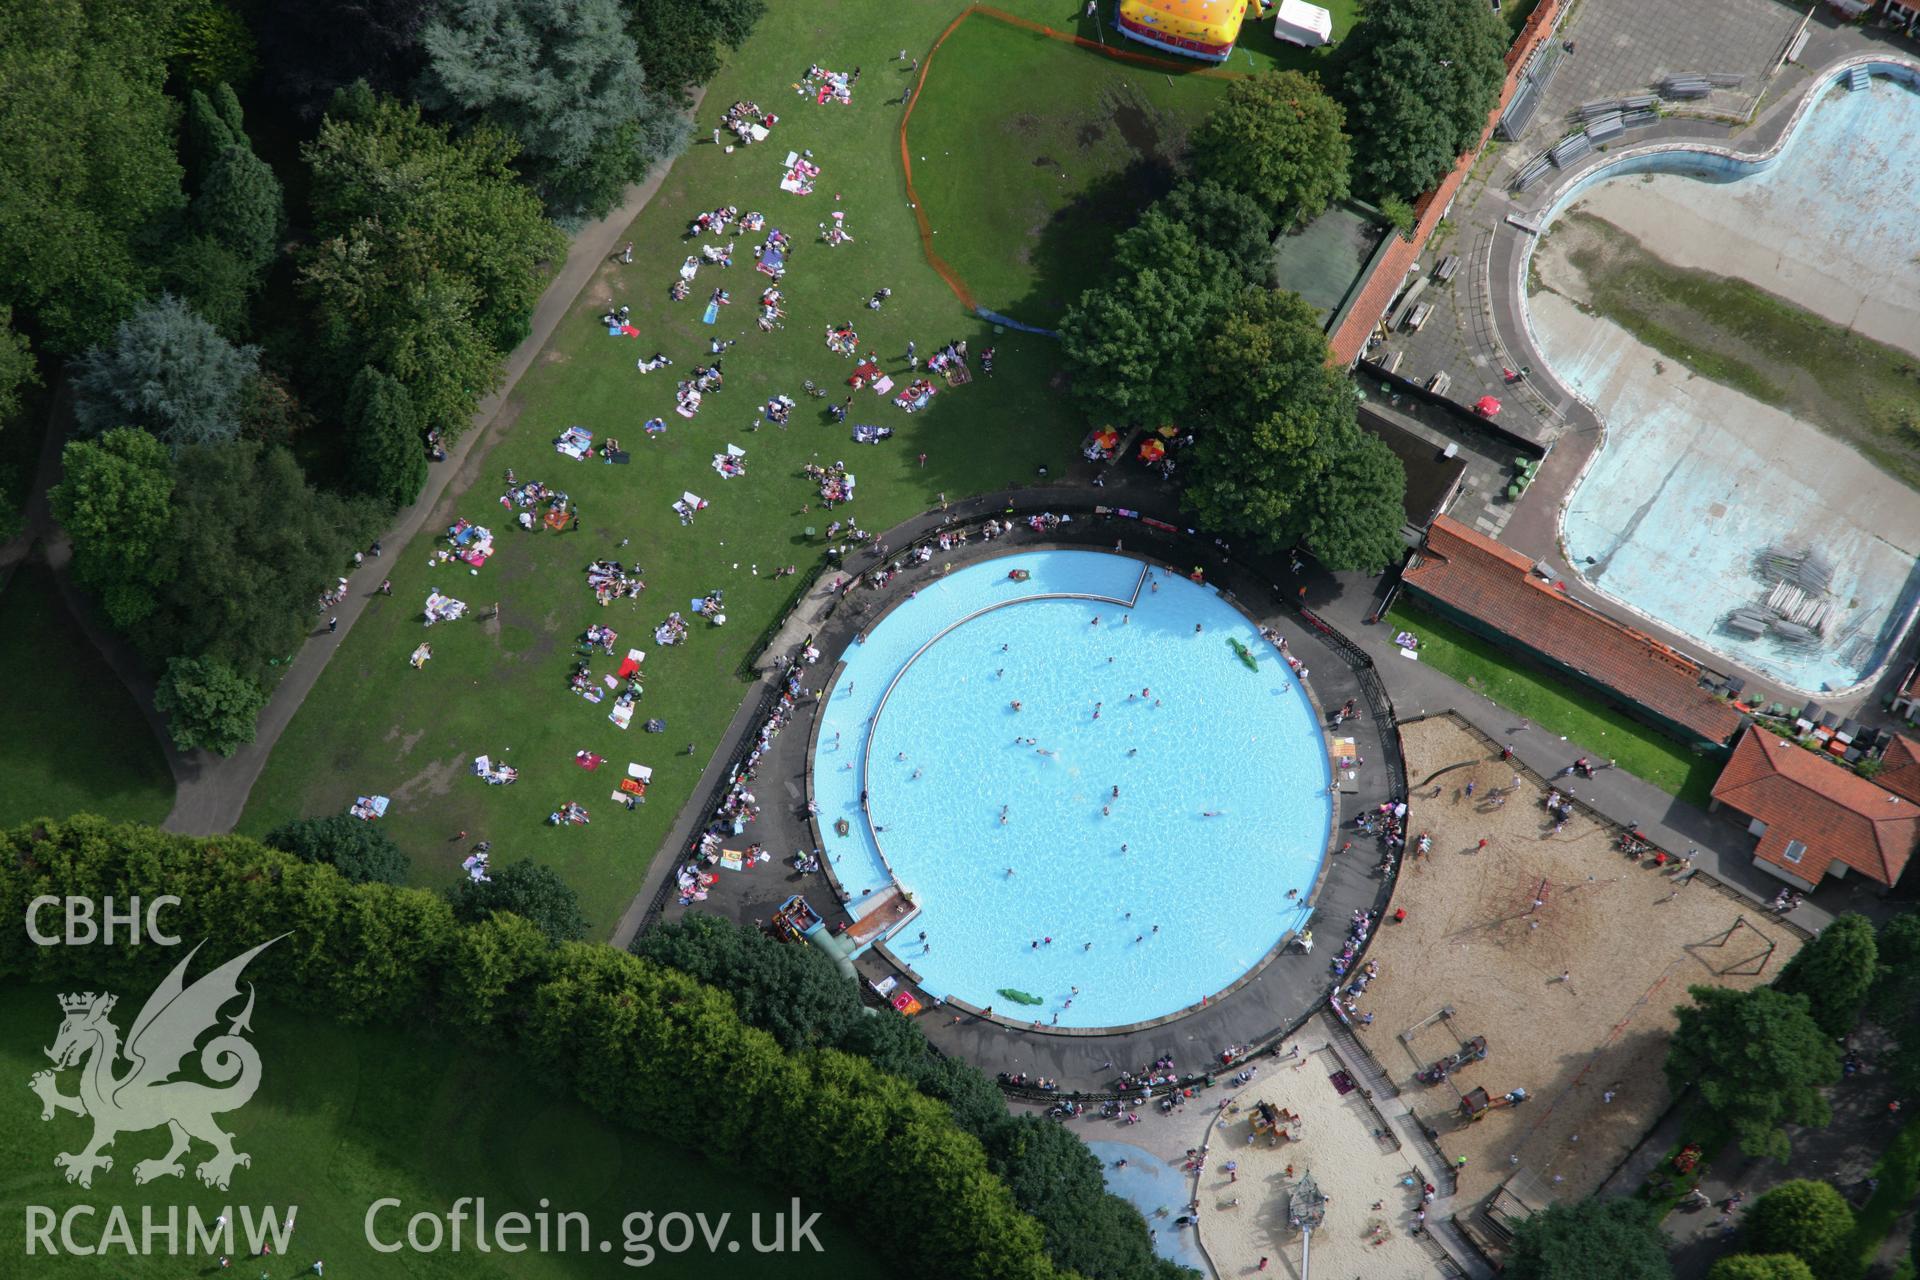 RCAHMW colour oblique aerial photograph of Ynysangharad Park, Pontypridd, showing the lido. Taken on 30 July 2007 by Toby Driver